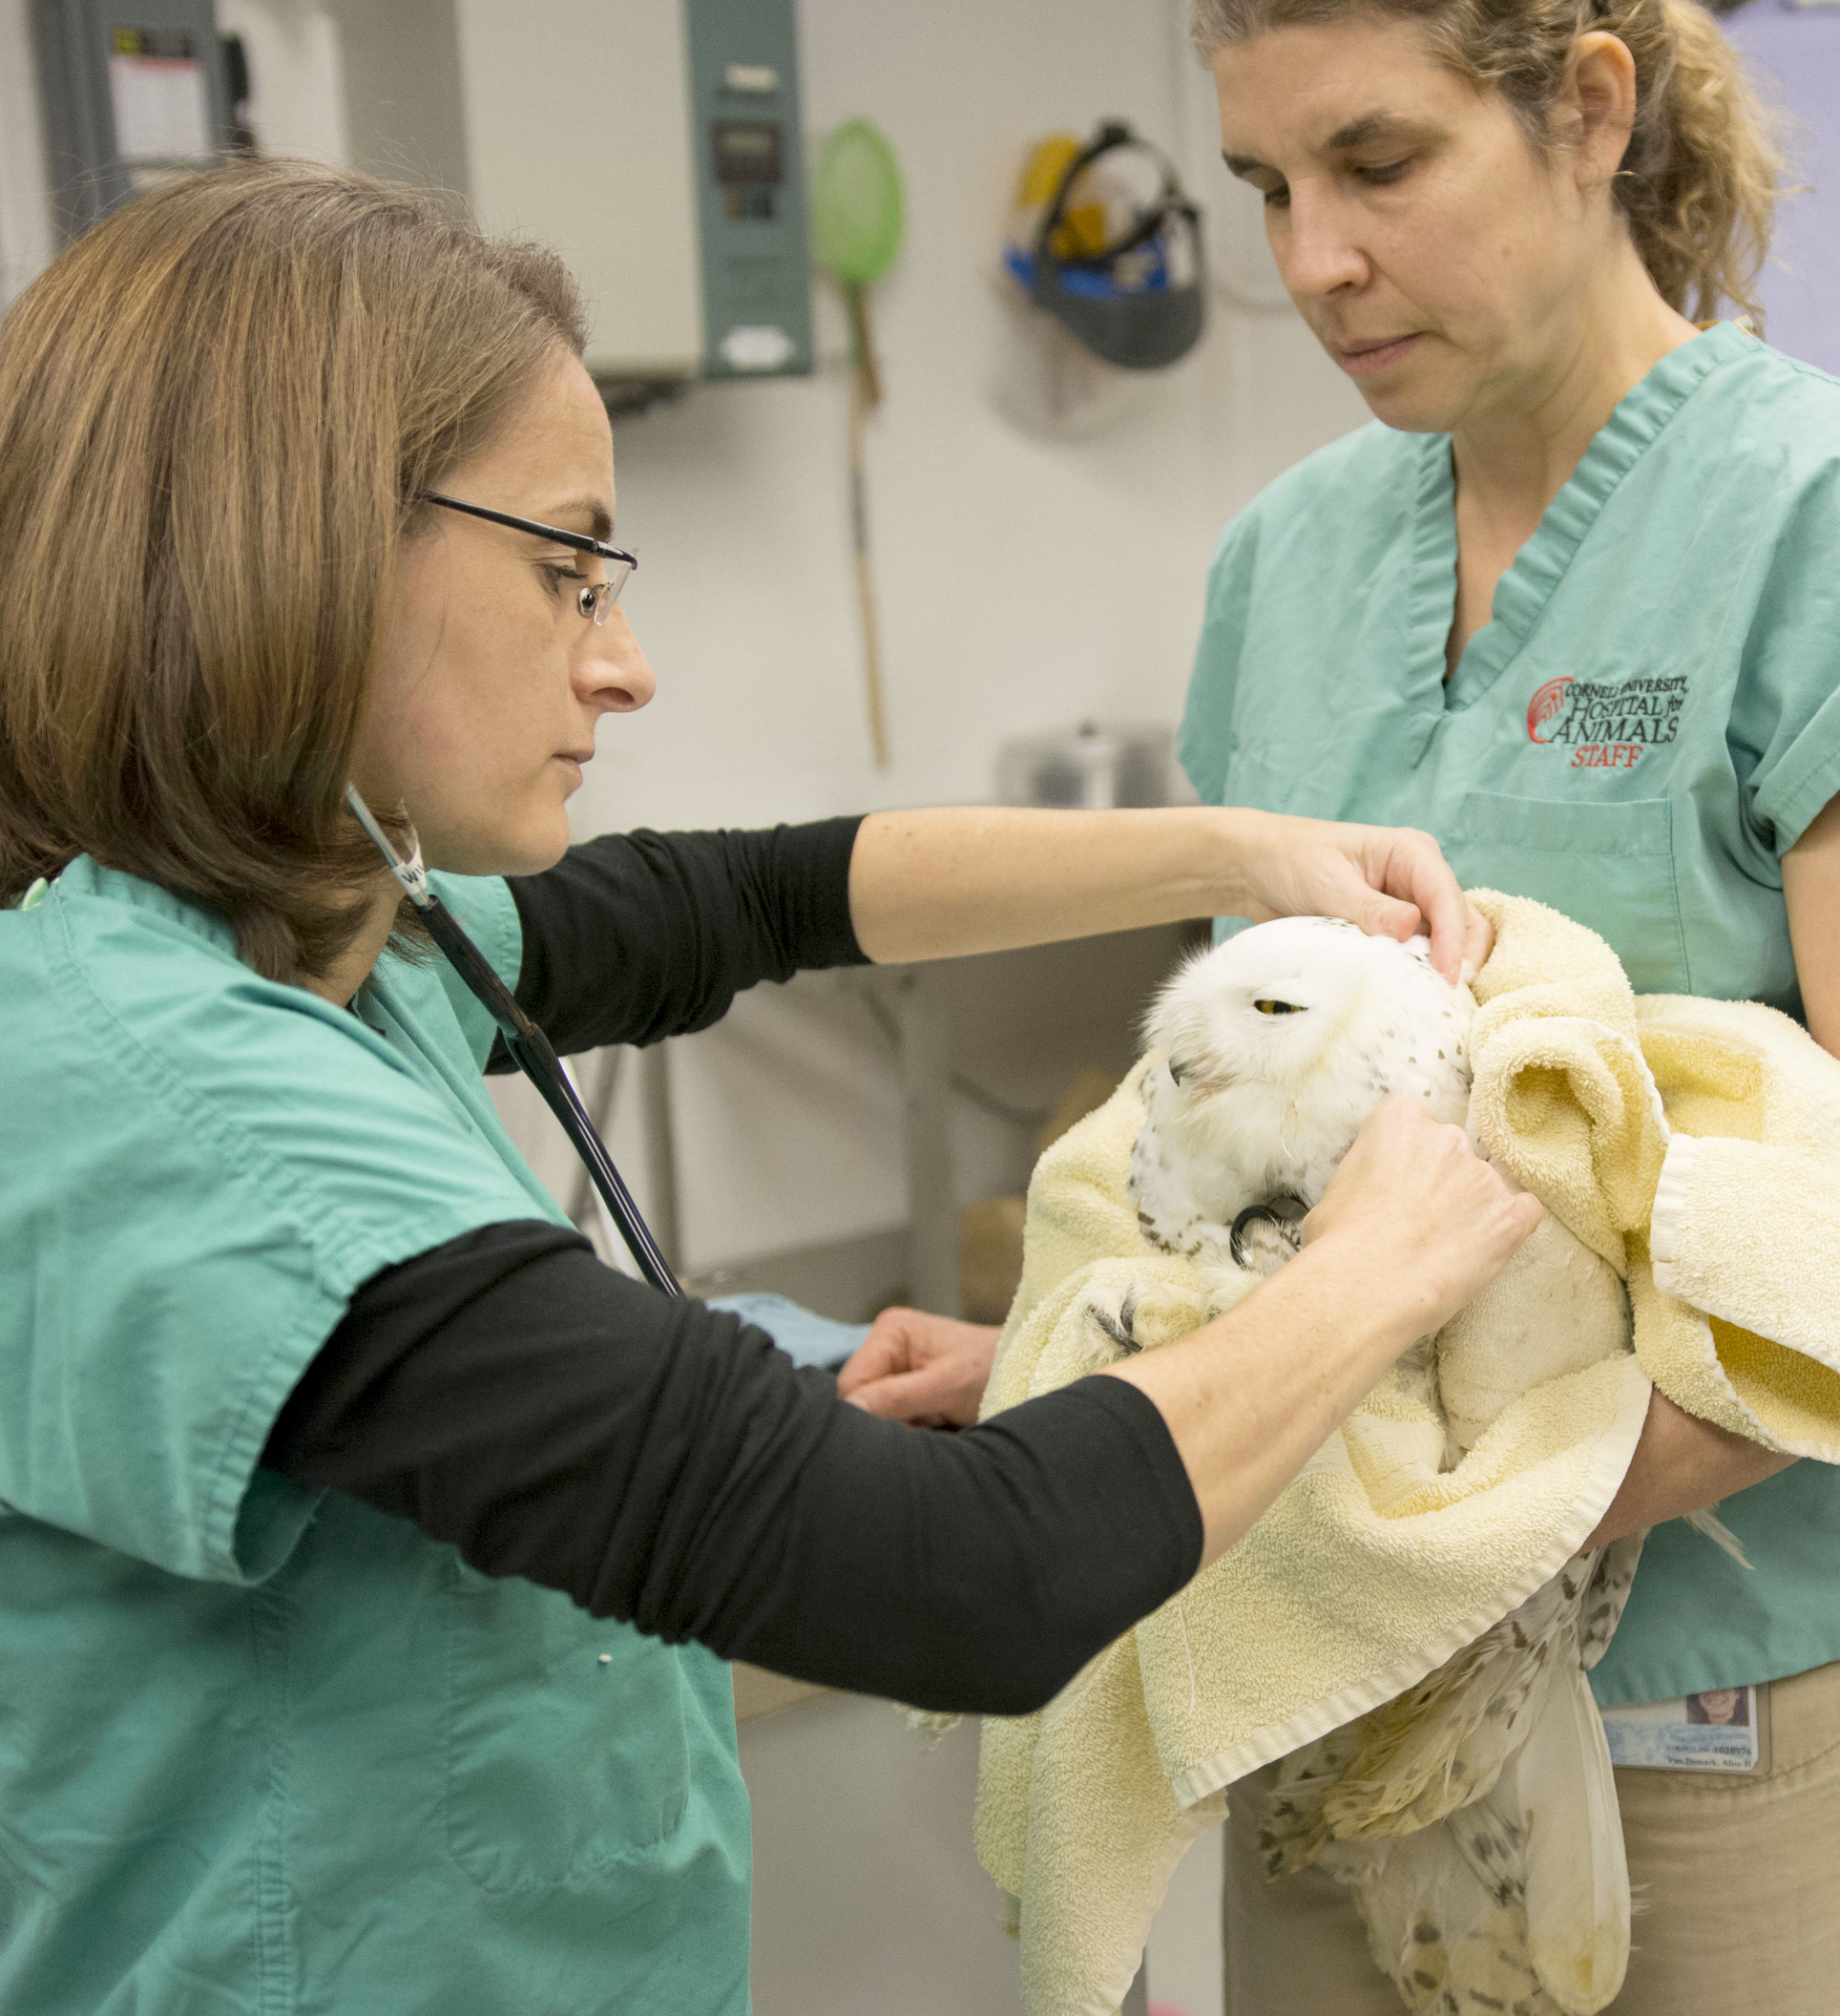 Injured Snowy Owl being examined by Dr. Sara Childs-Sanford with help from veterinary technician Alice VanDeMark at the Janet L. Swanson Wildlife Health Center January 2018